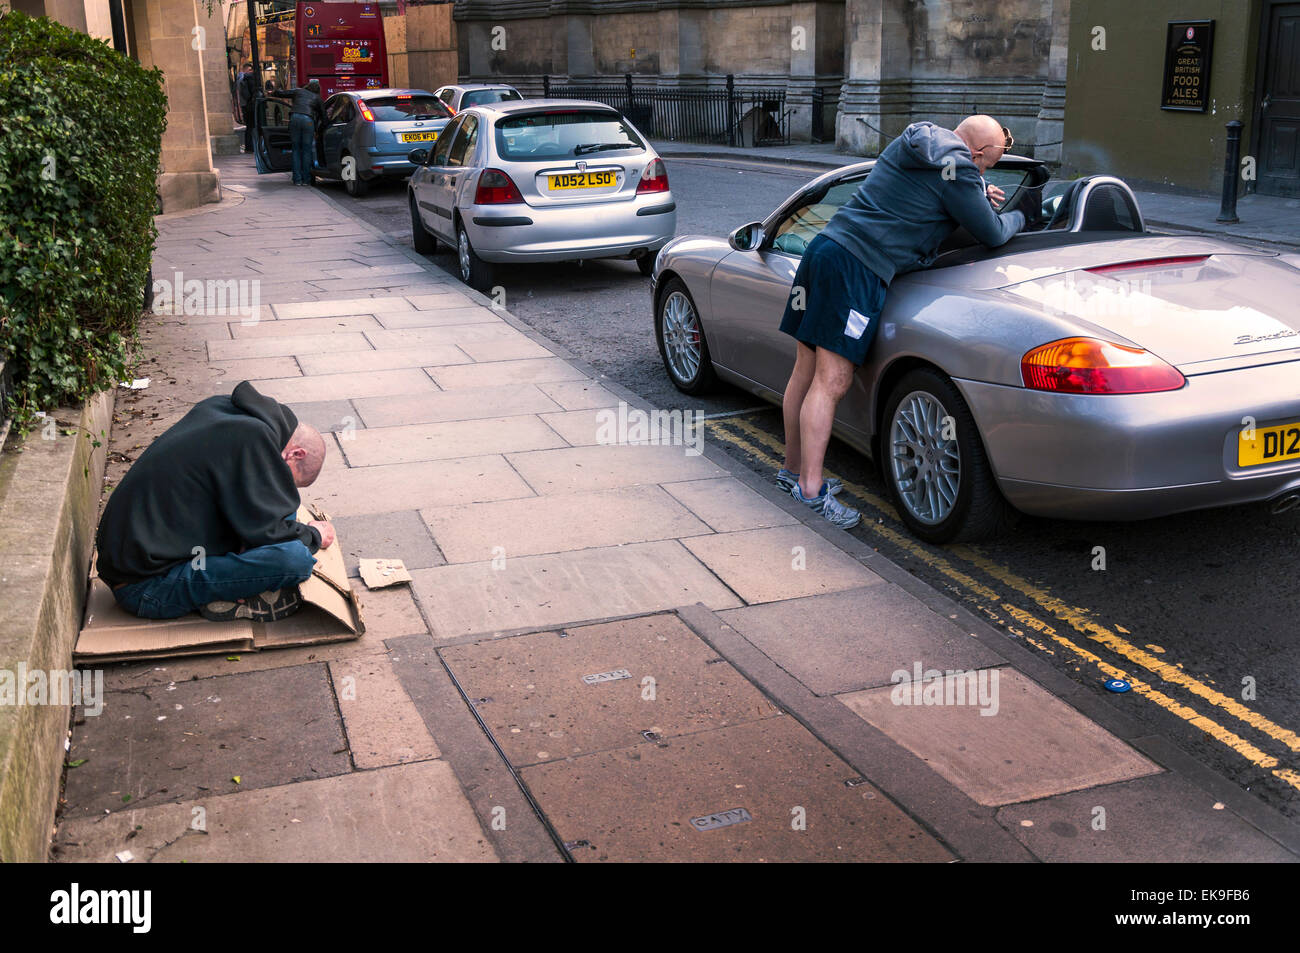 Bath, Somerset, UK. 8th April, 2015. Divided society economically as one man begs and another fills his Porsche Boxster with shopping. Credit:  Richard Wayman/Alamy Live News Stock Photo